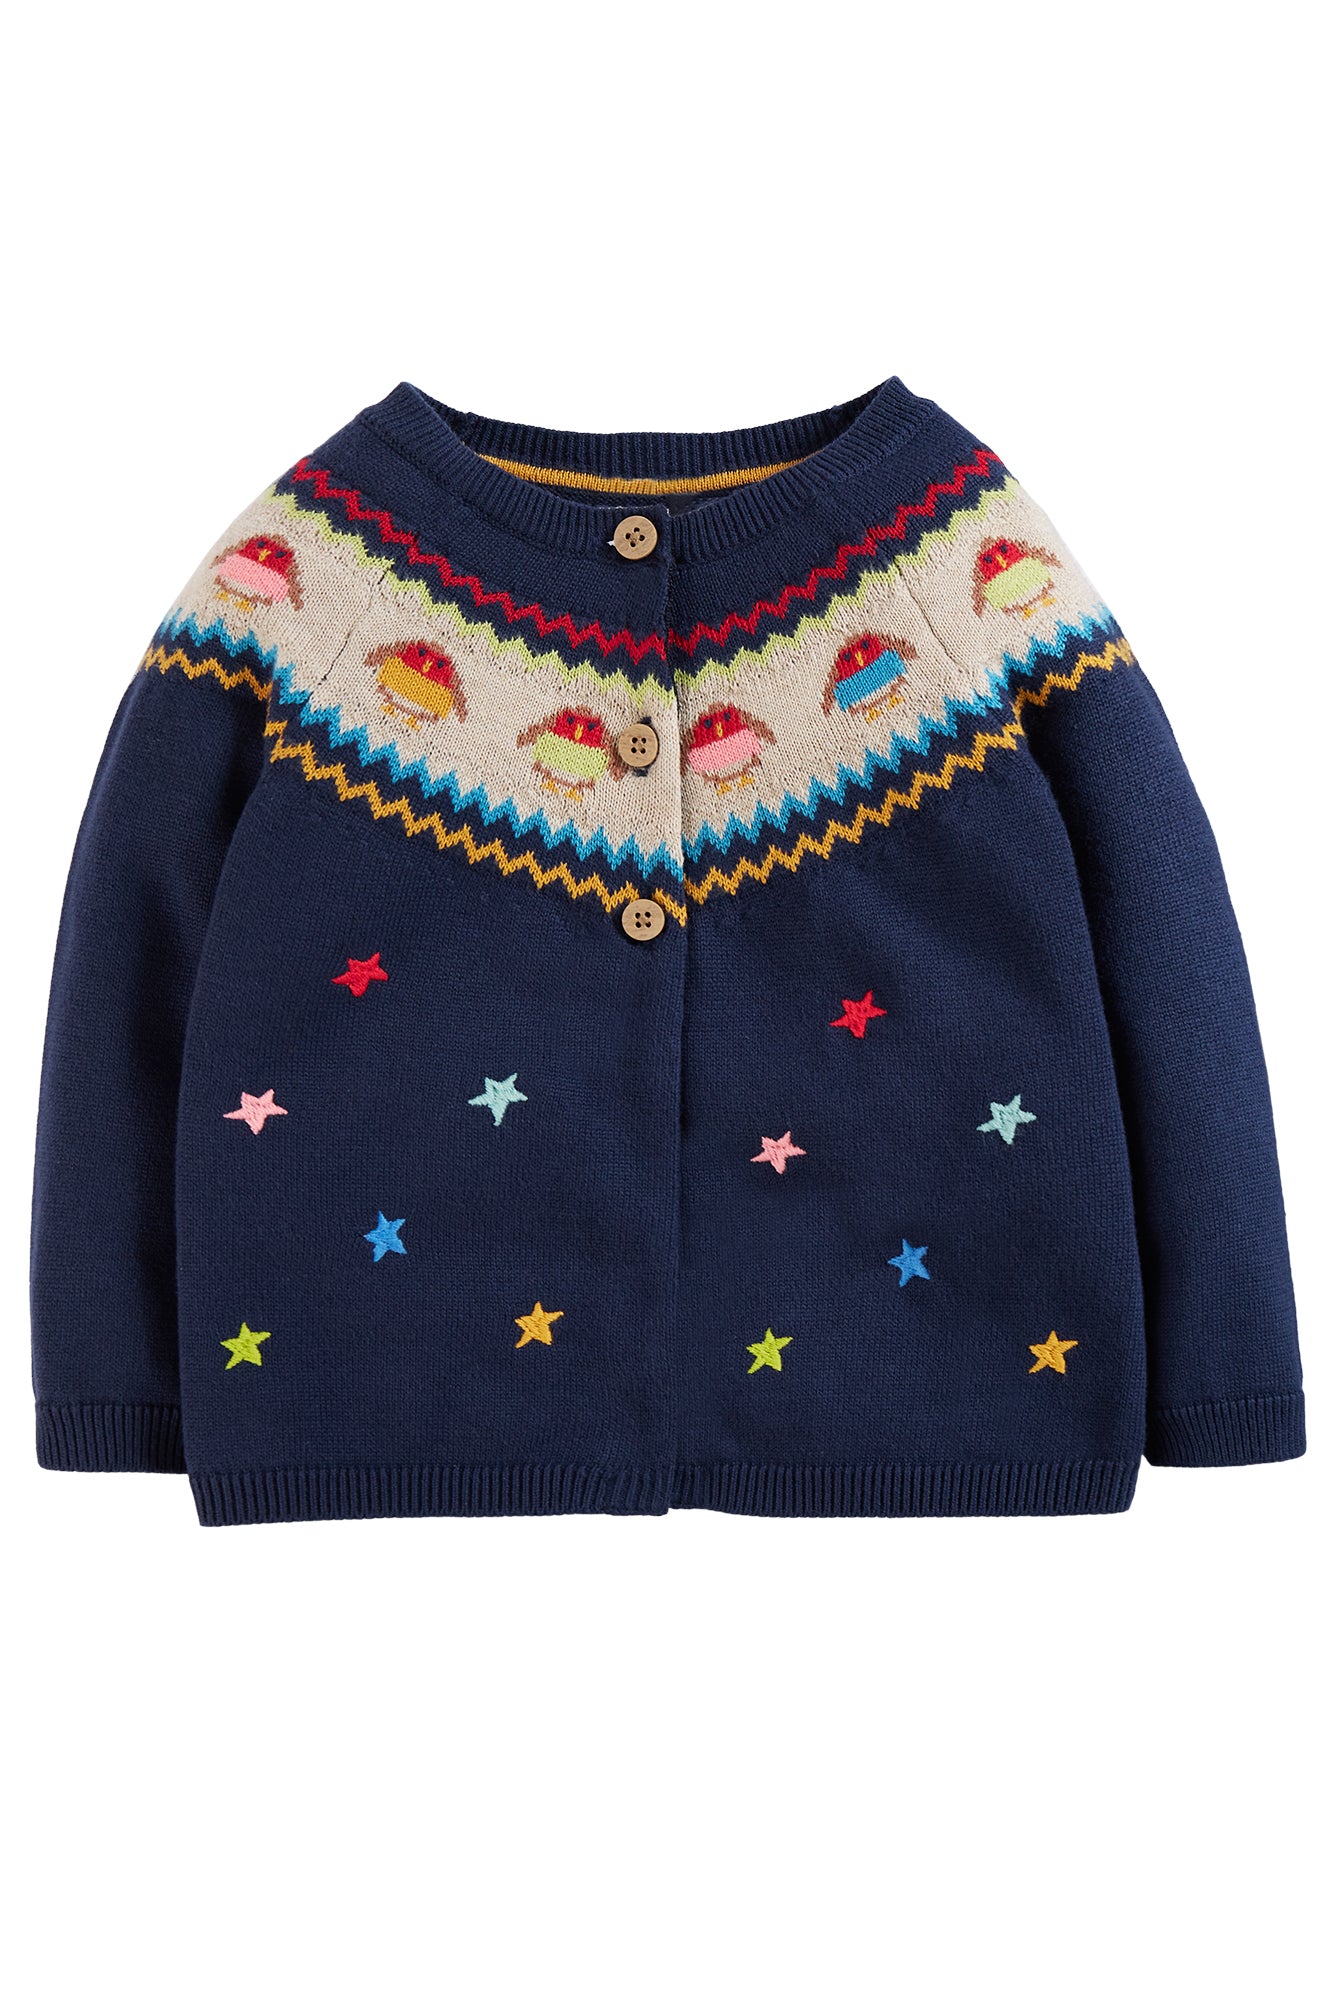 frugi kenna cardi at ehippersnappers online